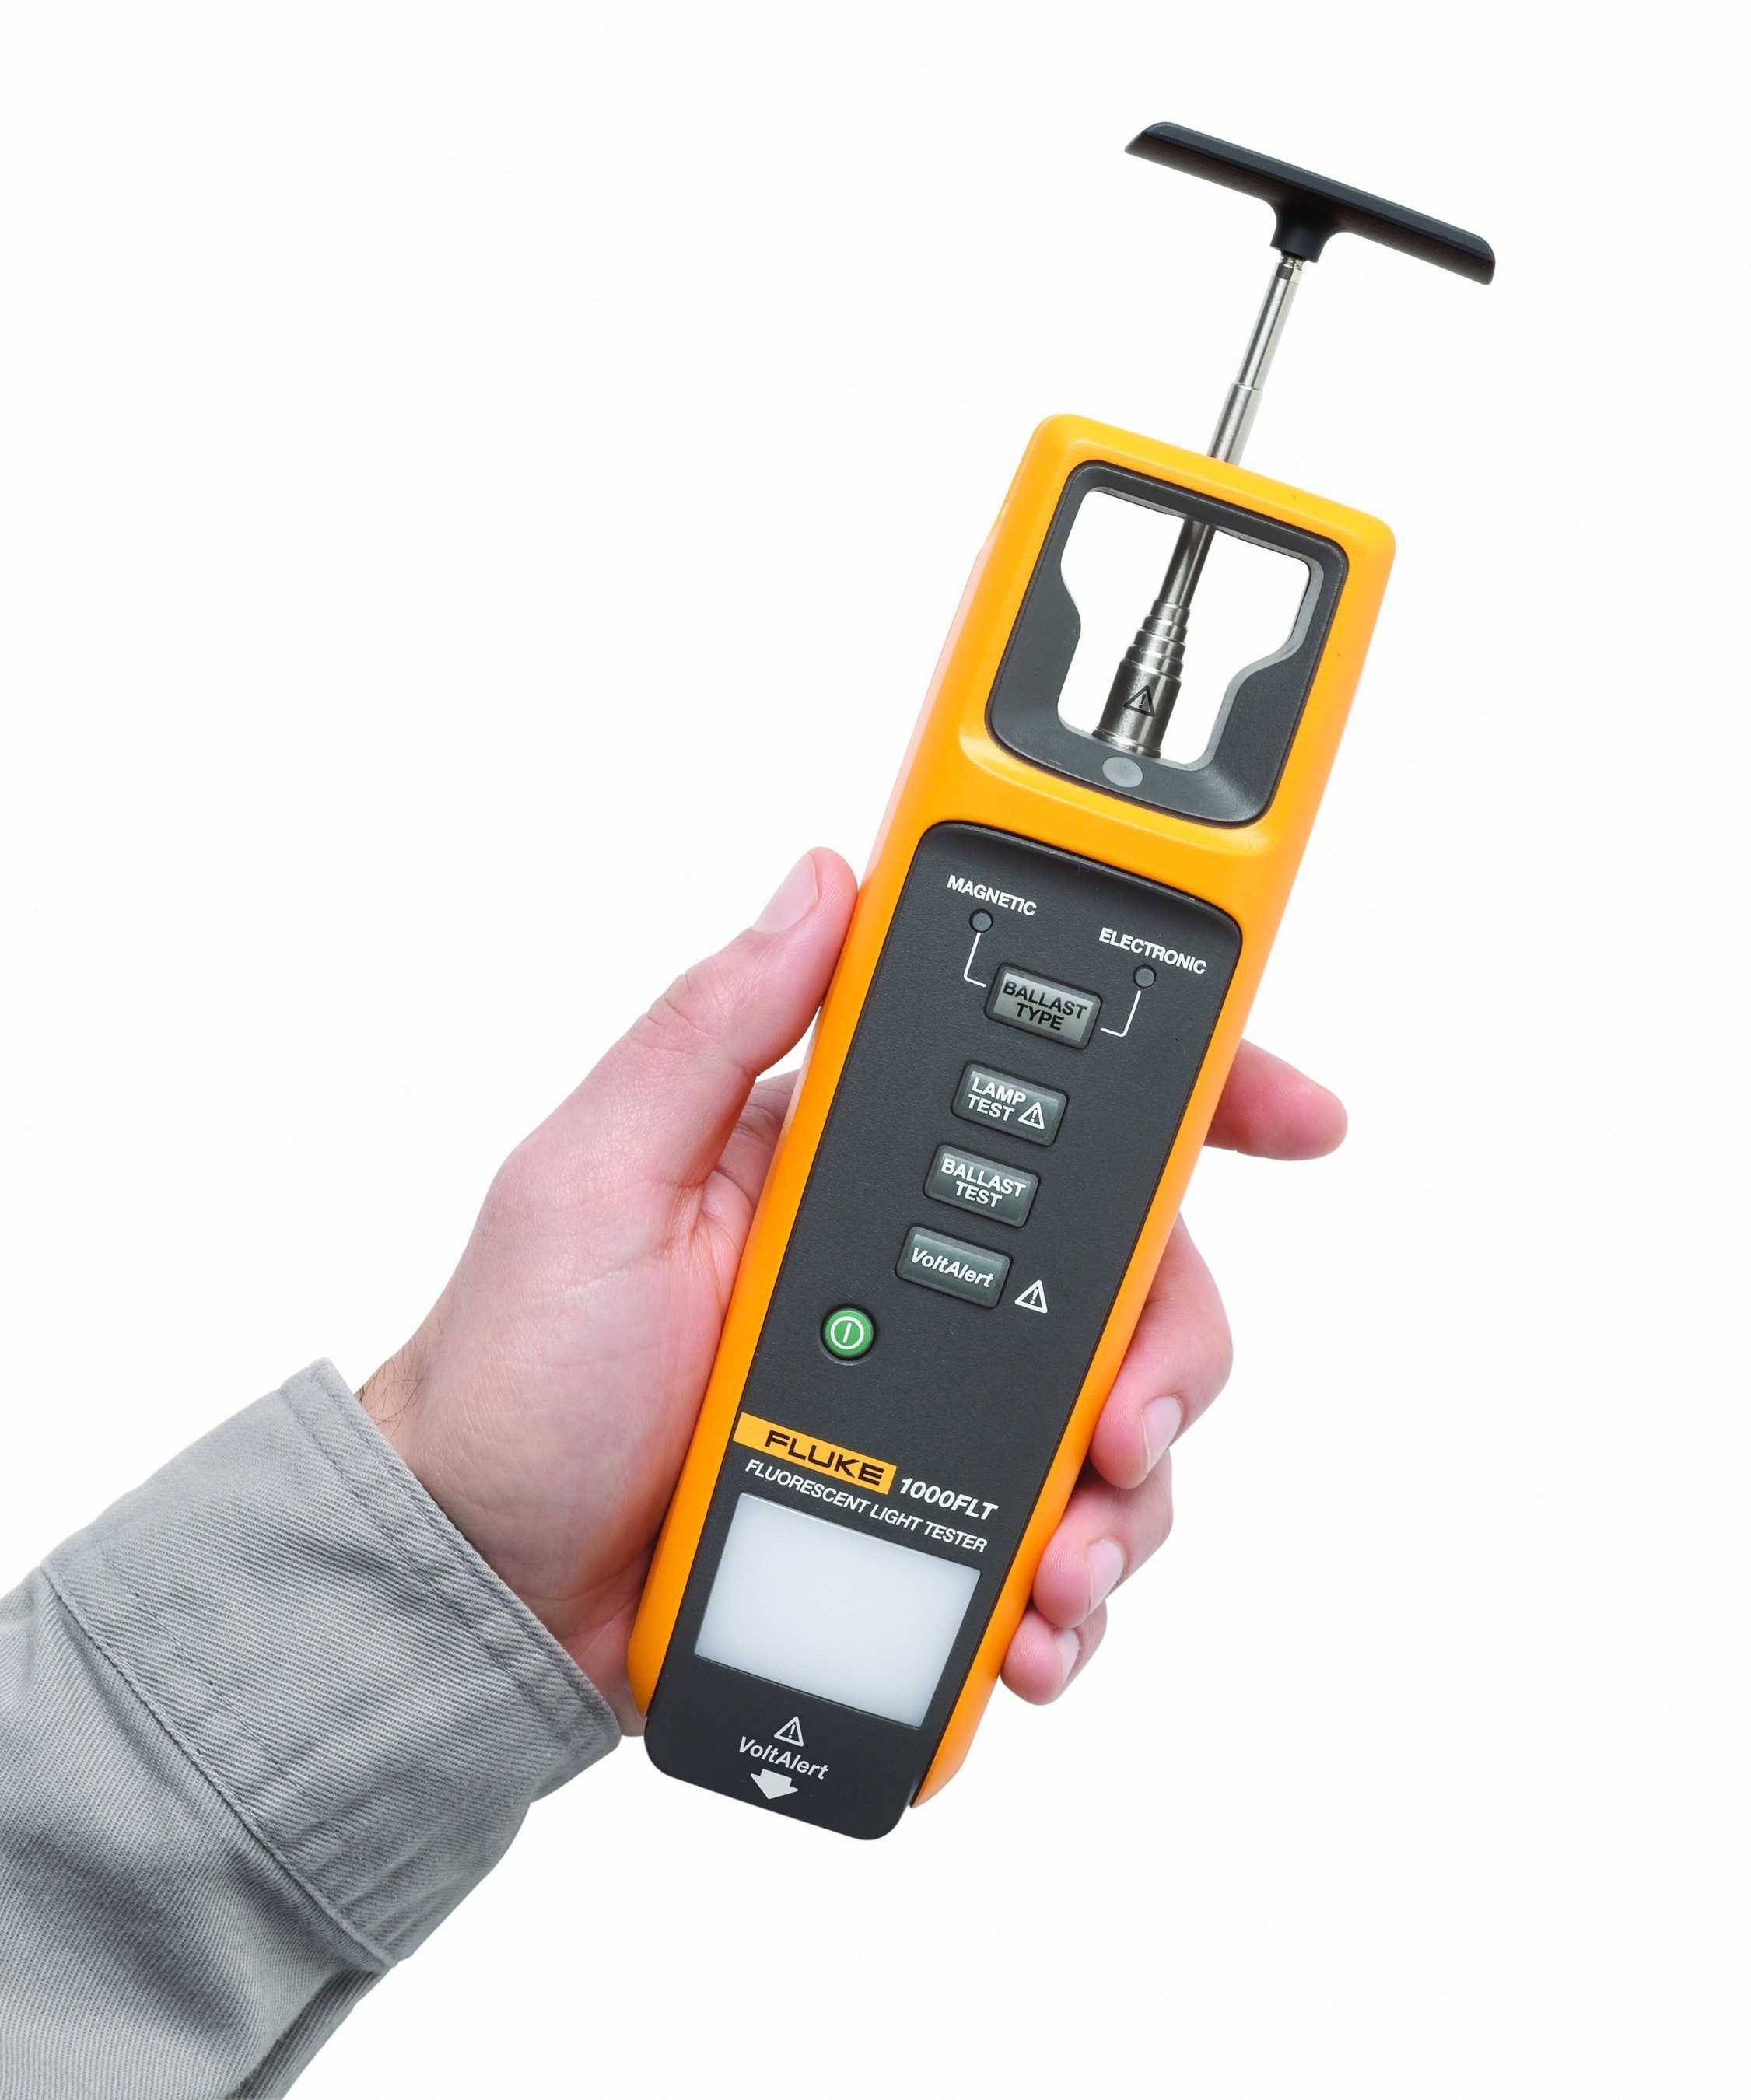 The Fluke(R) 1000FLT Fluorescent Light Tester eliminates the guesswork of maintaining fluorescent lamps by performing all the essential tests on lamps in less than 30 seconds: lamp tester, ballast tester, non-contact voltage detector, pin continuity tester, and ballast discriminator. The 1000FLT eliminates trial, error, and rework, and reduces the time maintenance teams spend fixing lights. (PRNewsFoto/Fluke Corporation)